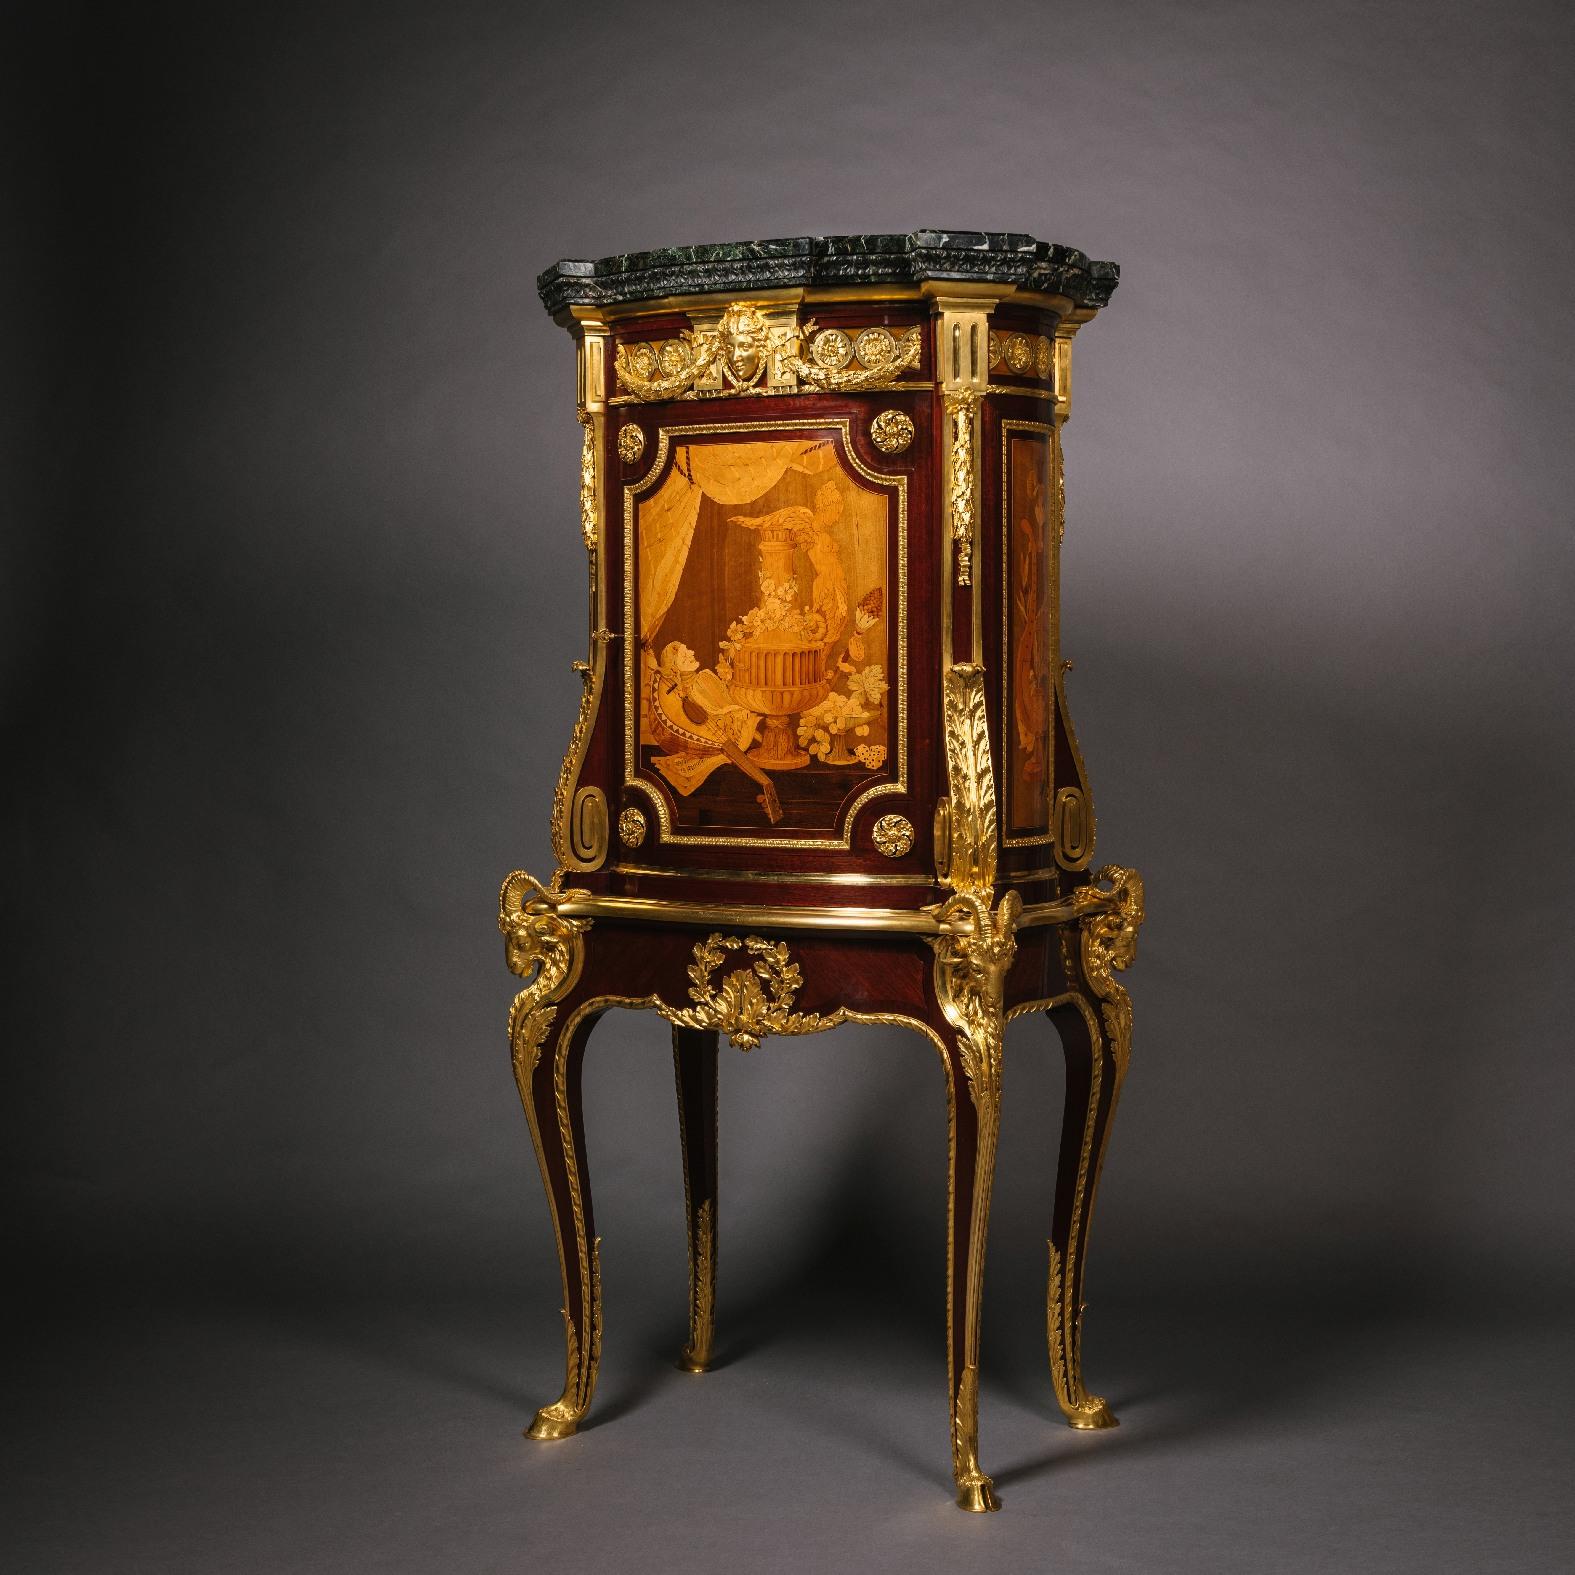 A Gilt-Bronze Mounted Marquetry Cabinet on Stand By Emmanuel-Alfred (dit Alfred II) Beurdeley

Of elliptical shape, this rare cabinet is designed to be viewed in the round. An exhibition piece, it illustrates the exceptional abilities in the art of